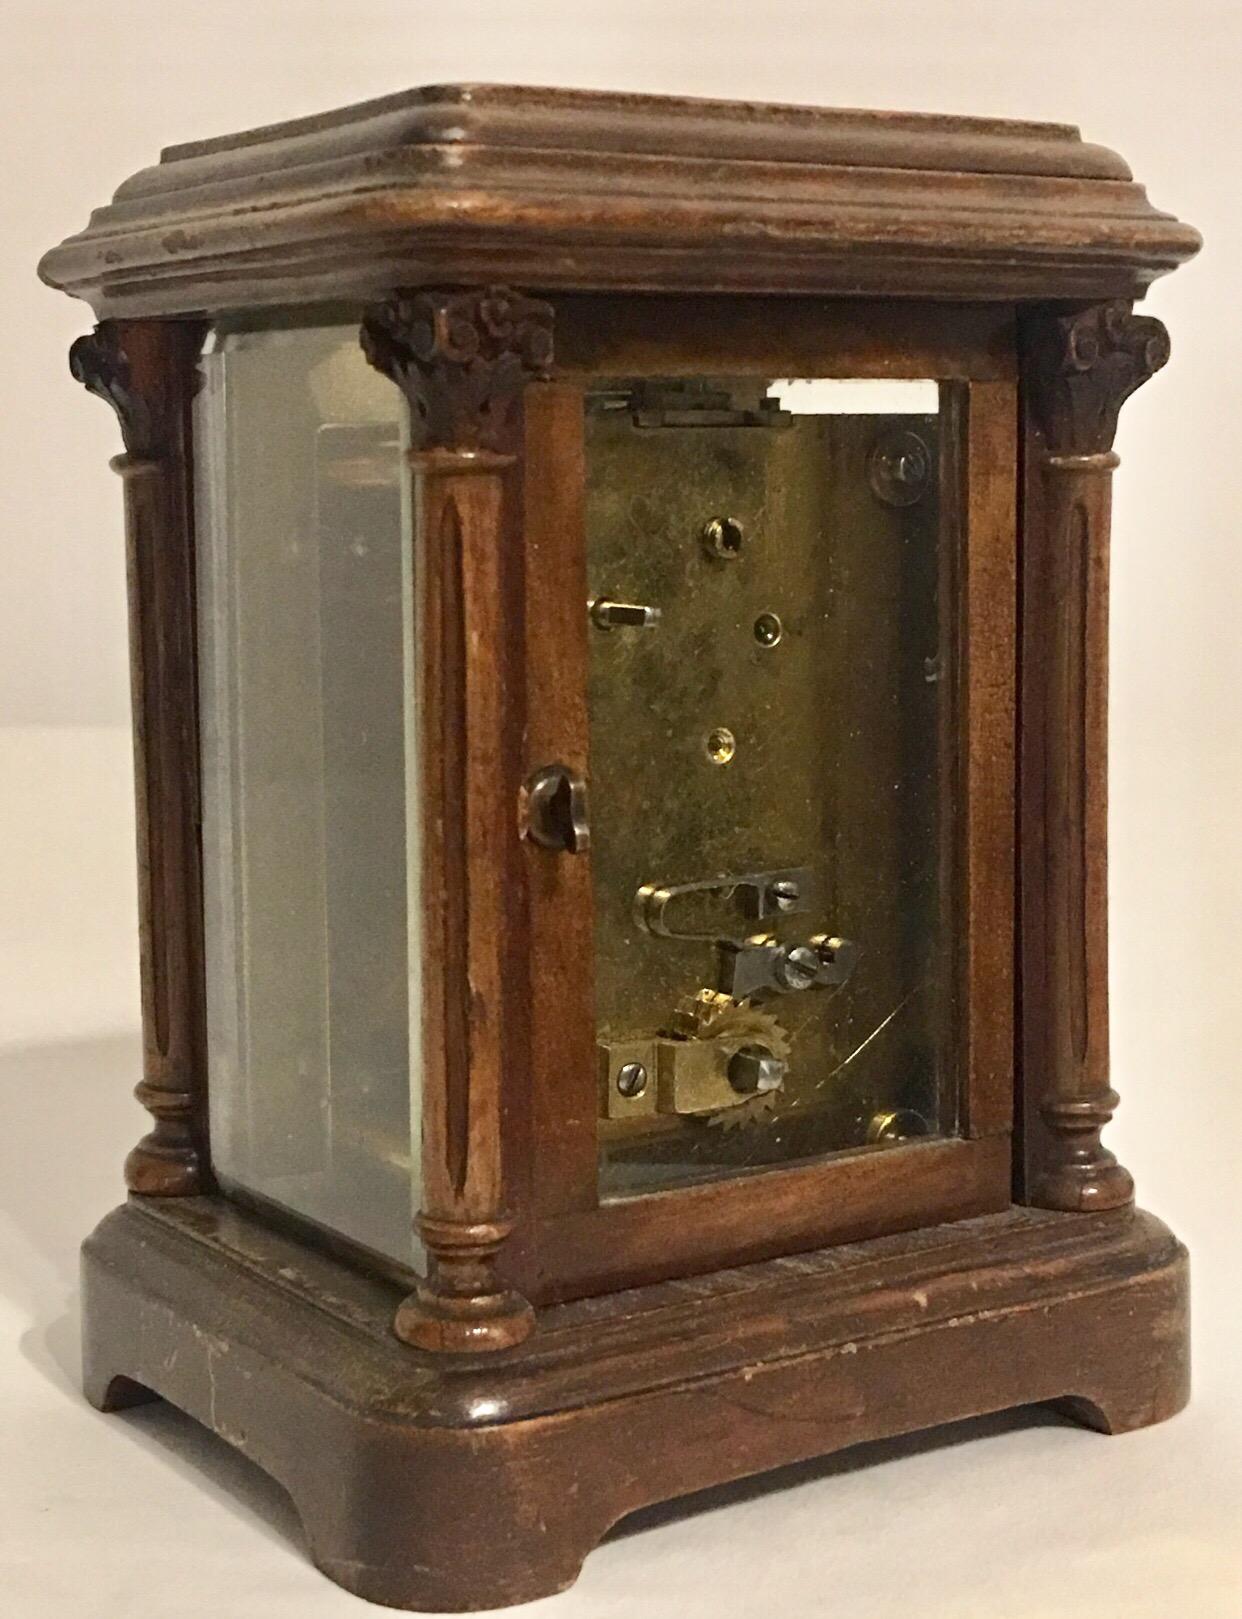 Glass Rare Antique Timepiece Wooden Mantel / Carriage Clock For Sale